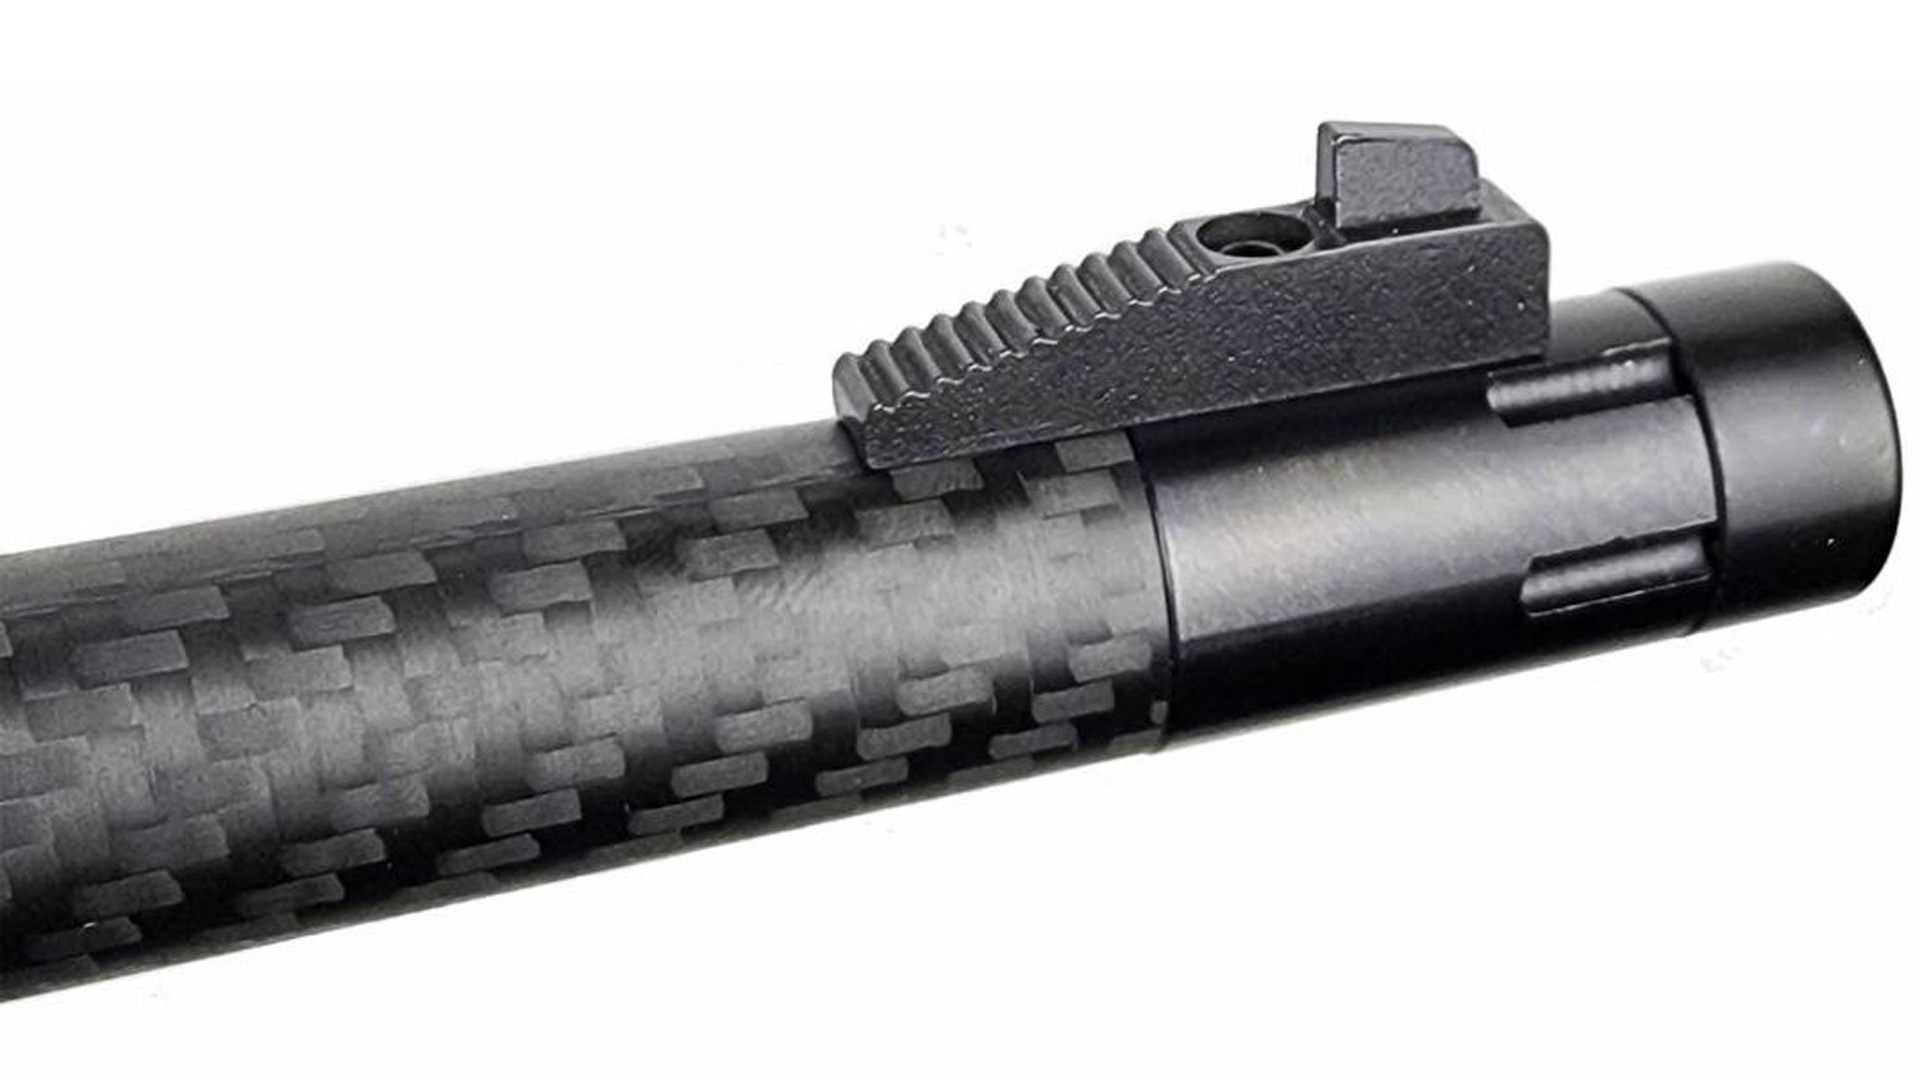 The carbon-fiber barrel of the Keystone Overlander Pack Rifle shown with a serrated front sight blade on top.